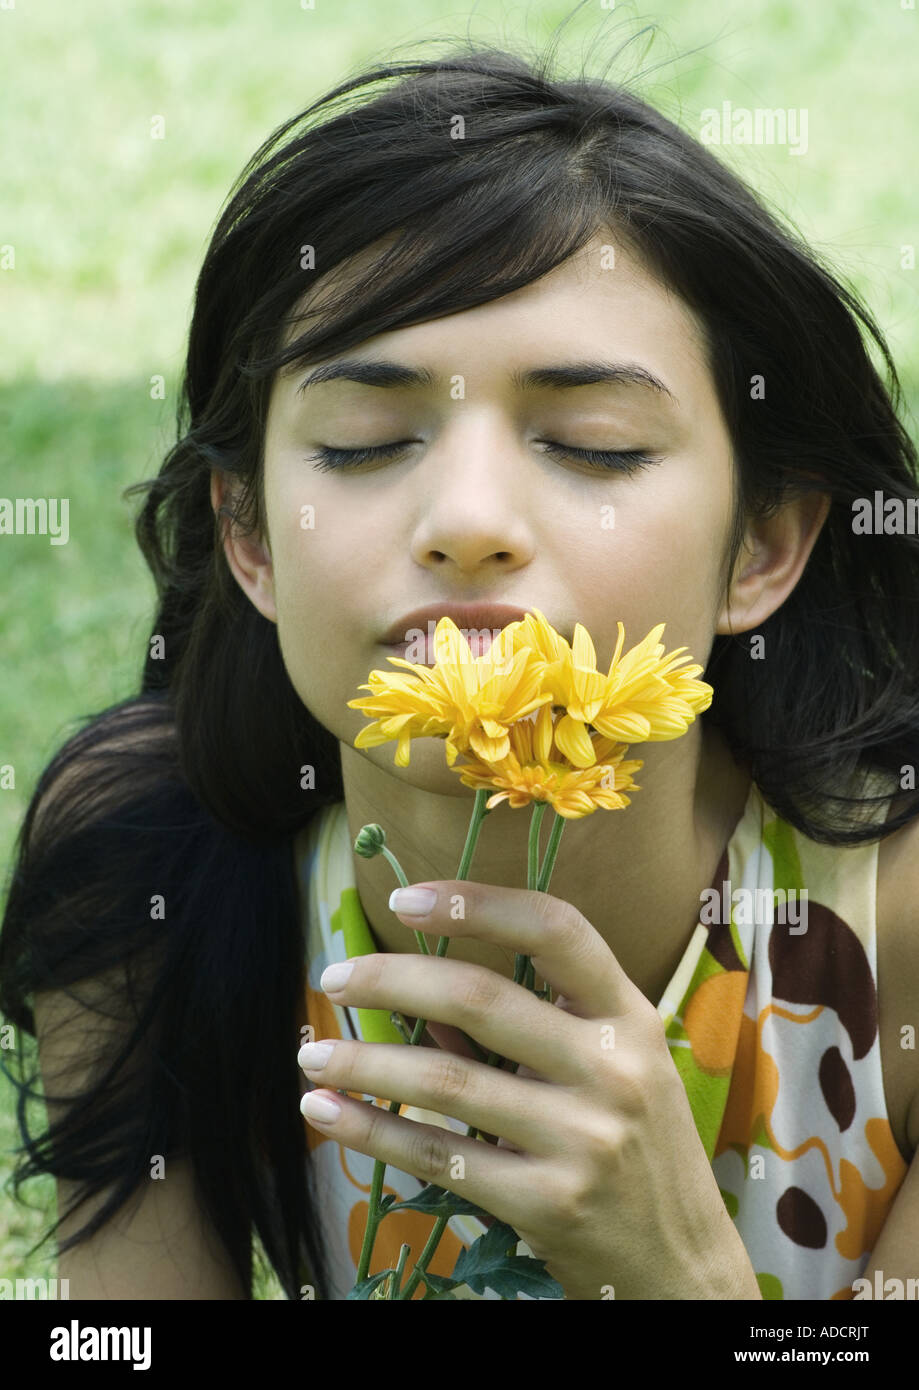 Woman smelling flowers, eyes closed Stock Photo